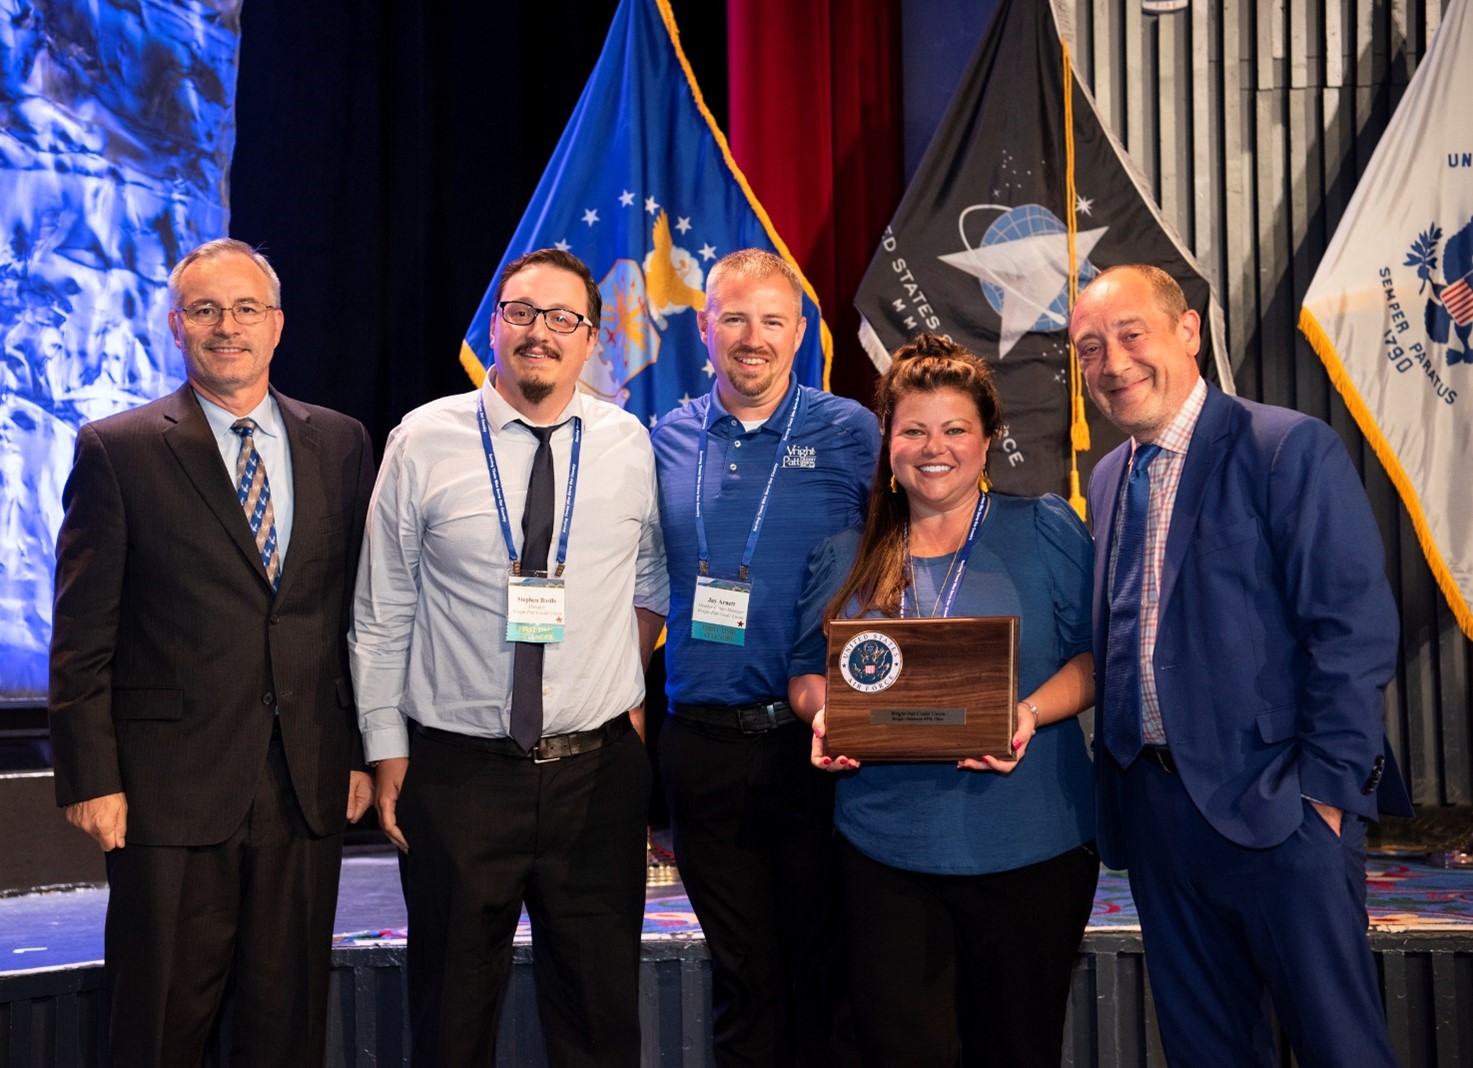 Members of the WPCU team accept the 2022 Air Force Distinguished Credit Union of the Year award at the Defense Credit Union Council’s 60th Annual Conference in Colorado Springs, Colorado.